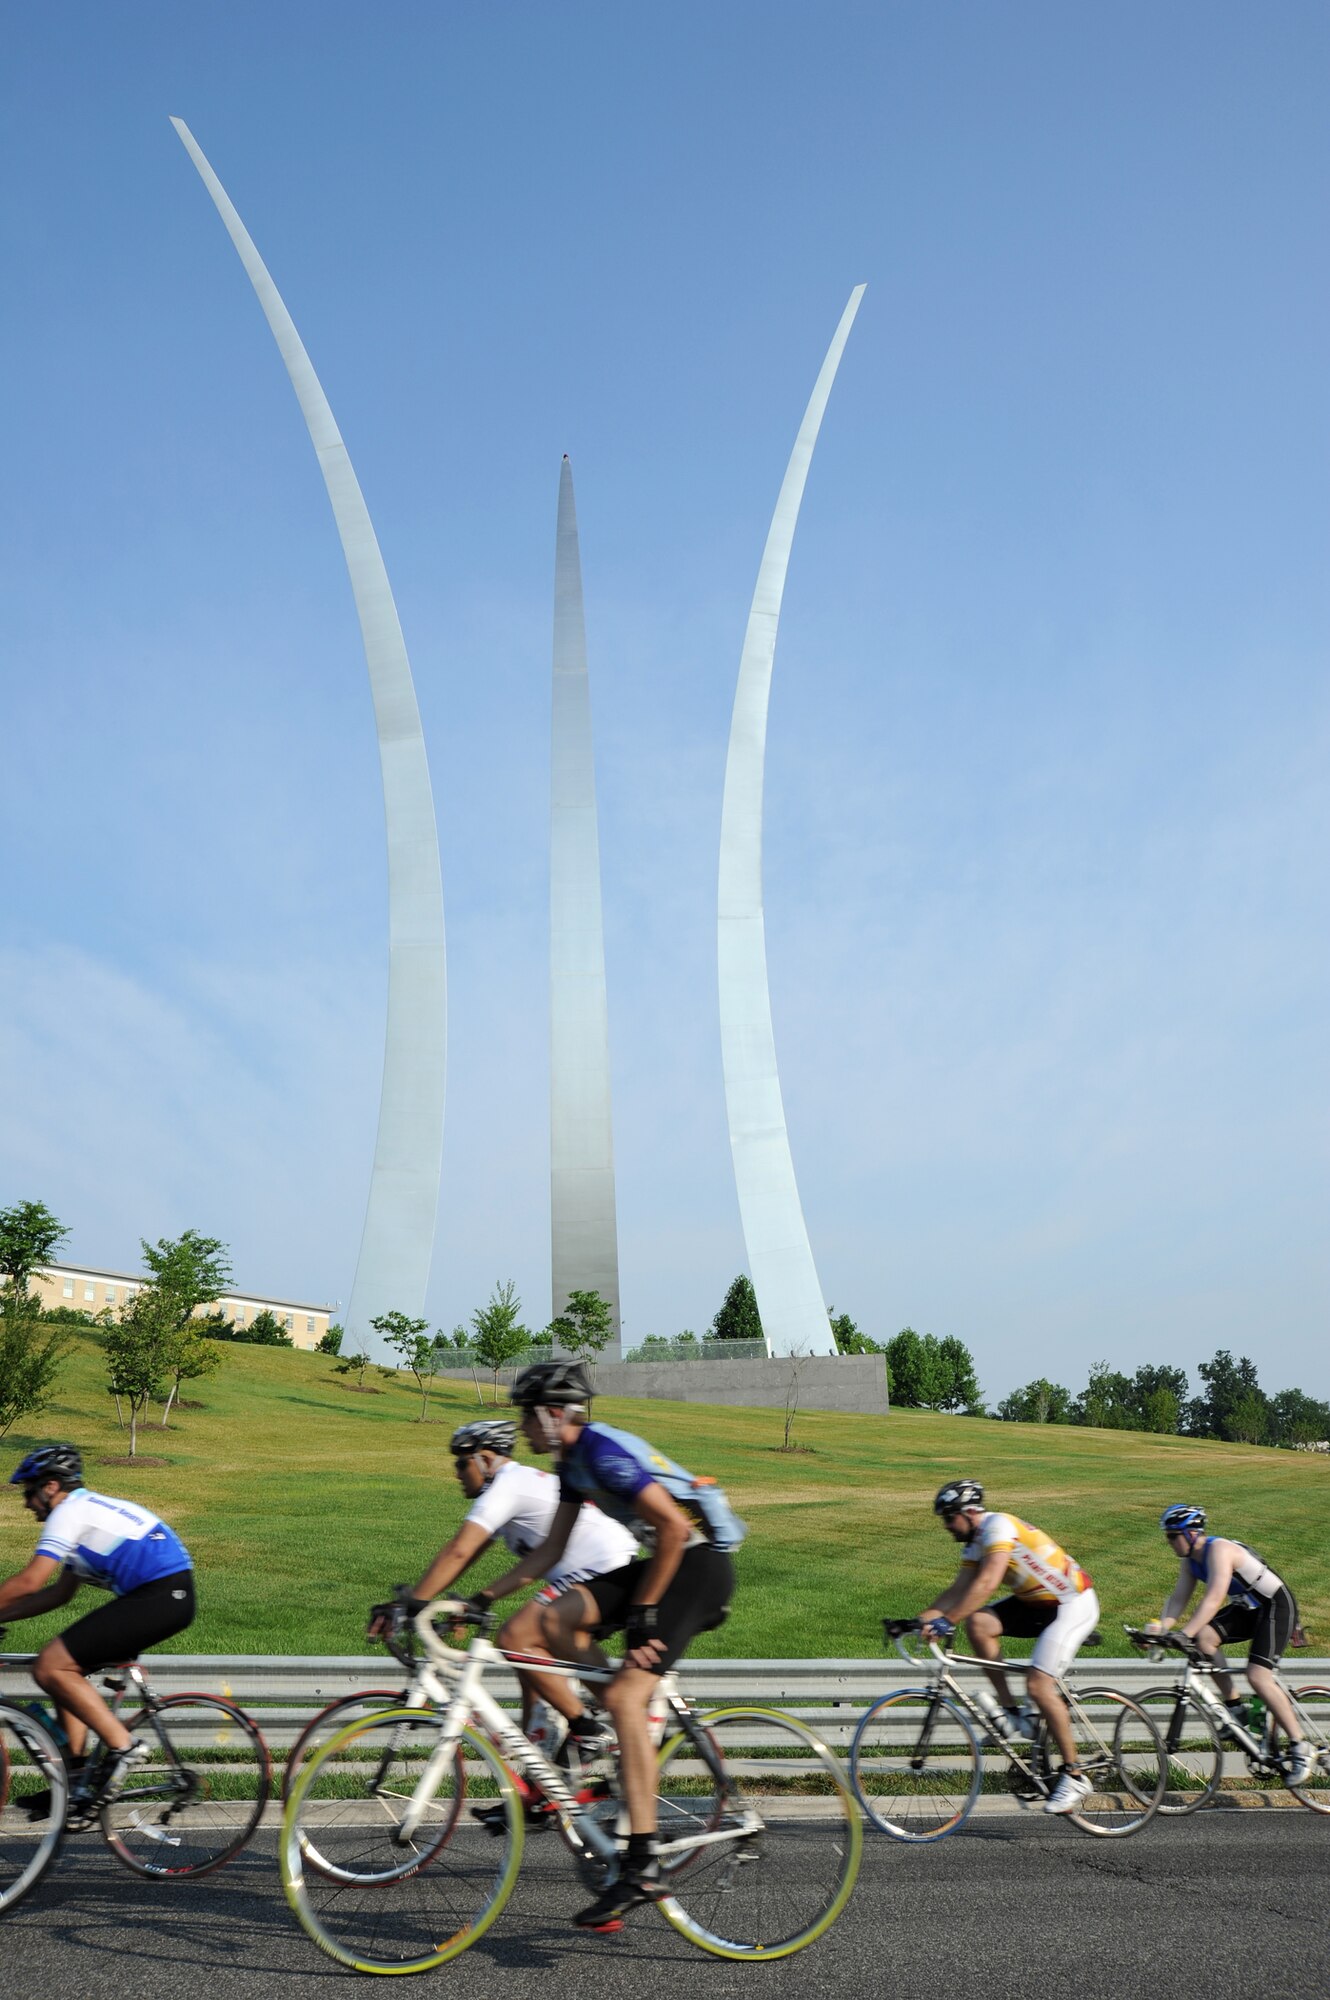 The Crystal Ride Challenge, a 12.5-kilometer course open to both professional and non-professional riders, began at both the Crystal City start line and the Air Force Memorial start line June 12, 2011, and included a scenic view of the memorial itself. More than 1,600 cyclists rode in the Crystal Ride Challenge. Many riders in the event participated for fun and fitness while other competitors rode as teams to raise money for charity. (U.S. Air Force photo/Master Sgt. Tracy L. DeMarco)